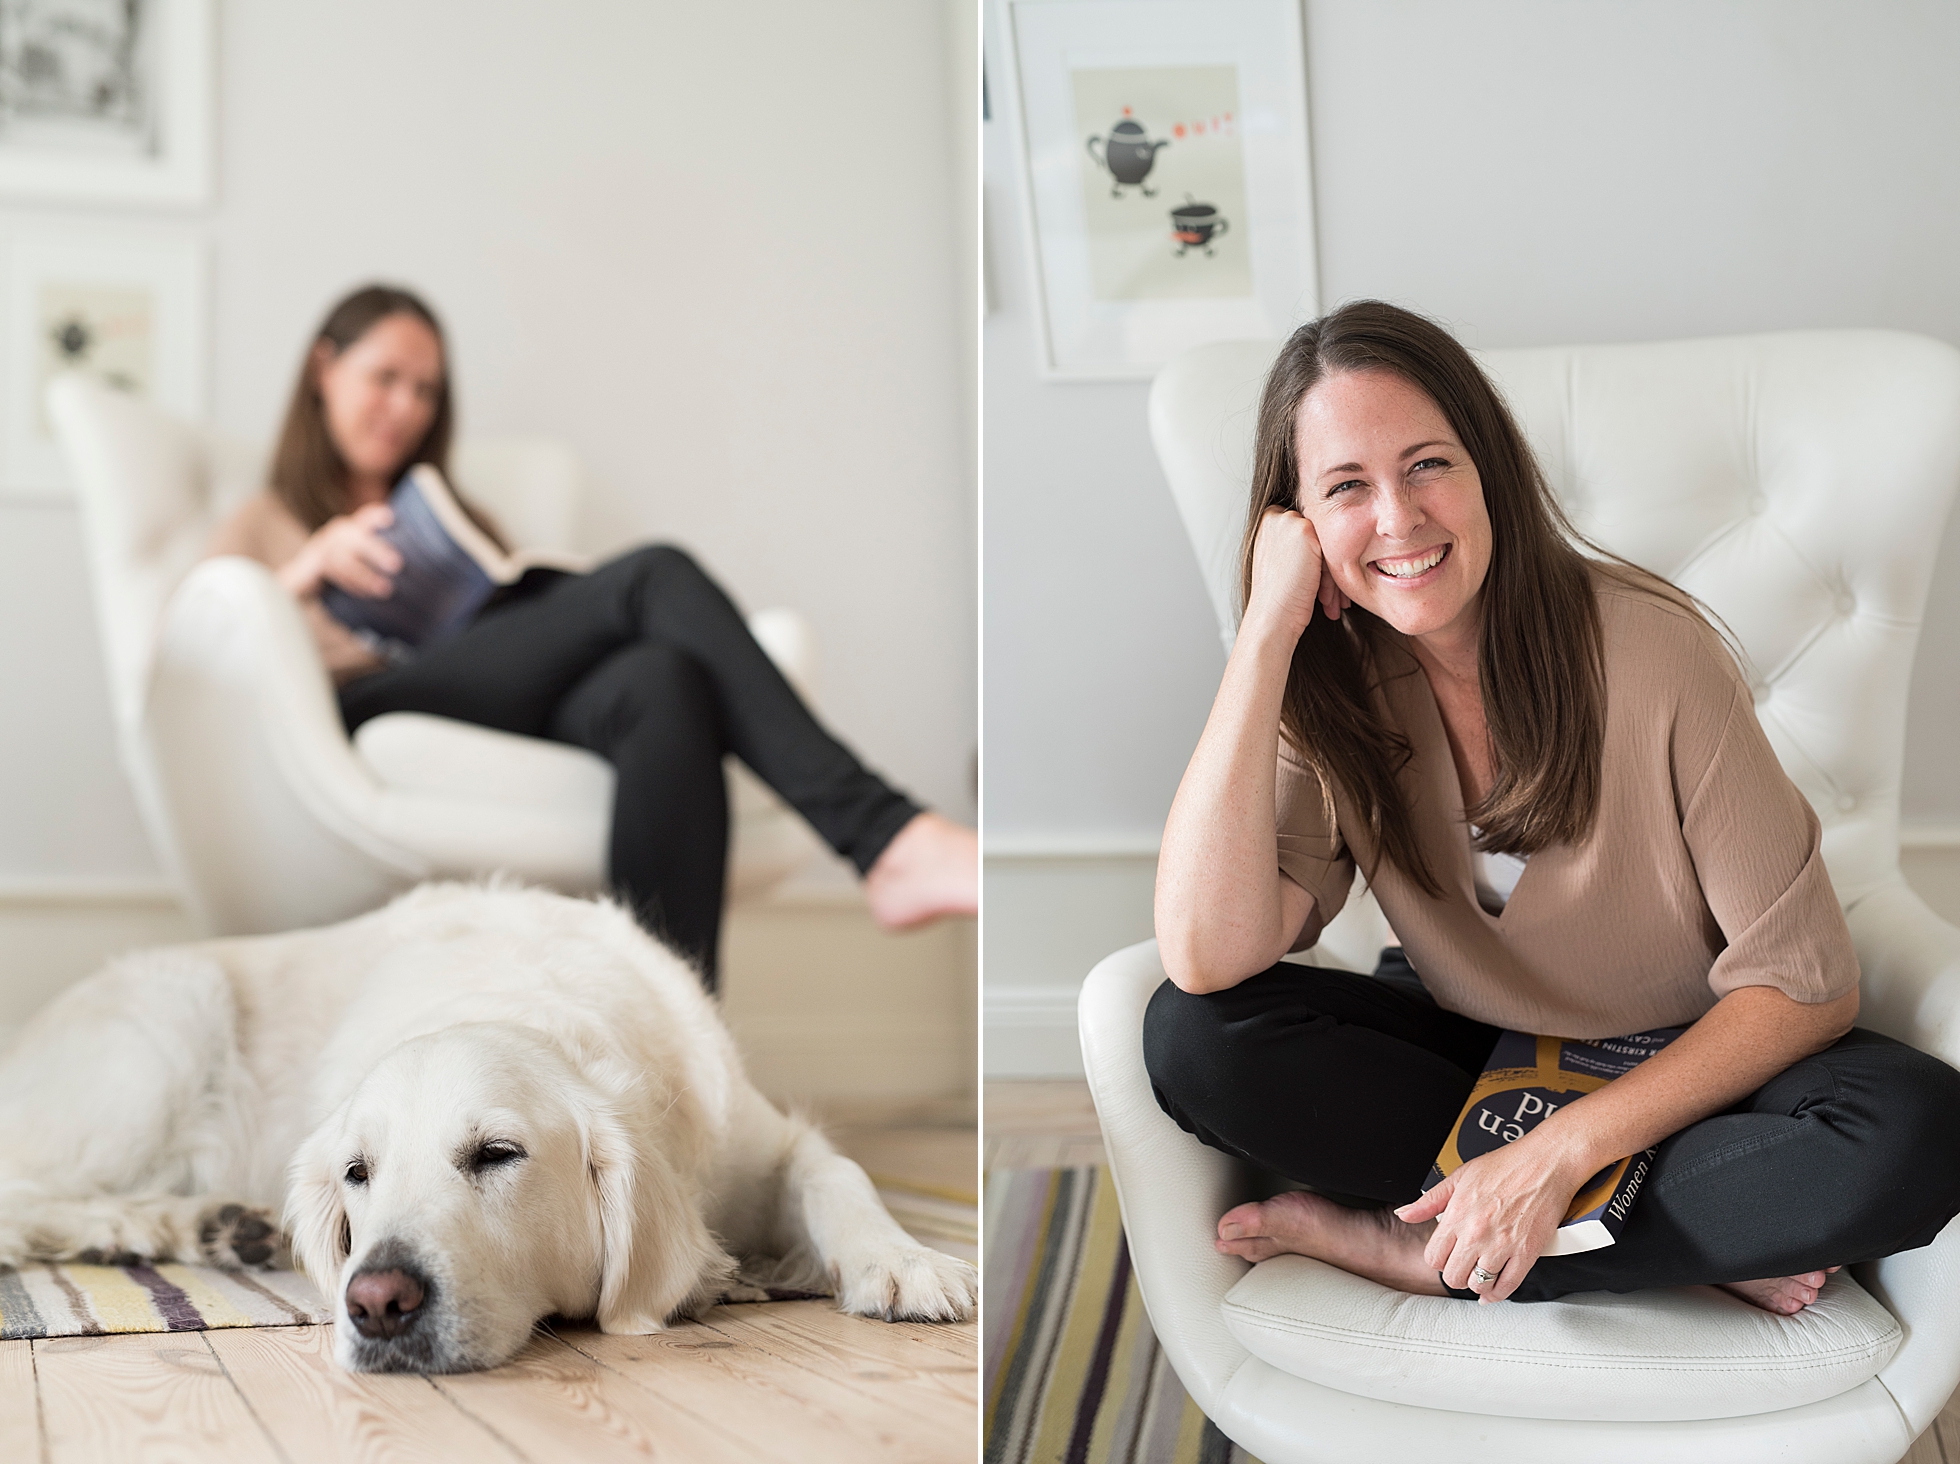 Light and airy brand photos of photographer, Janine Laag and her dog